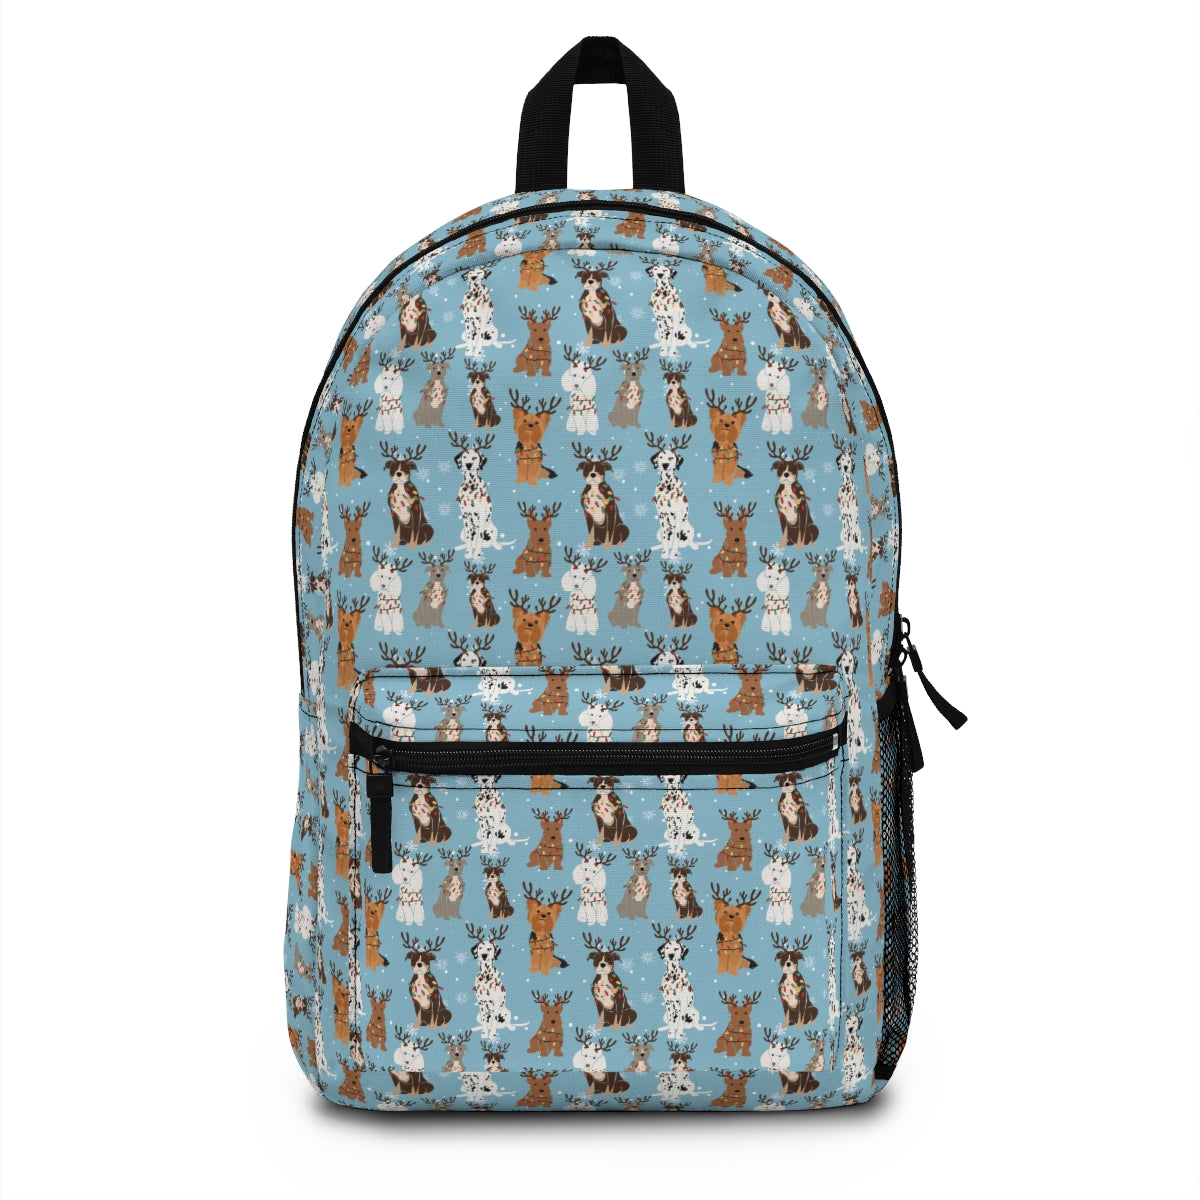 Winter Puppies Backpack